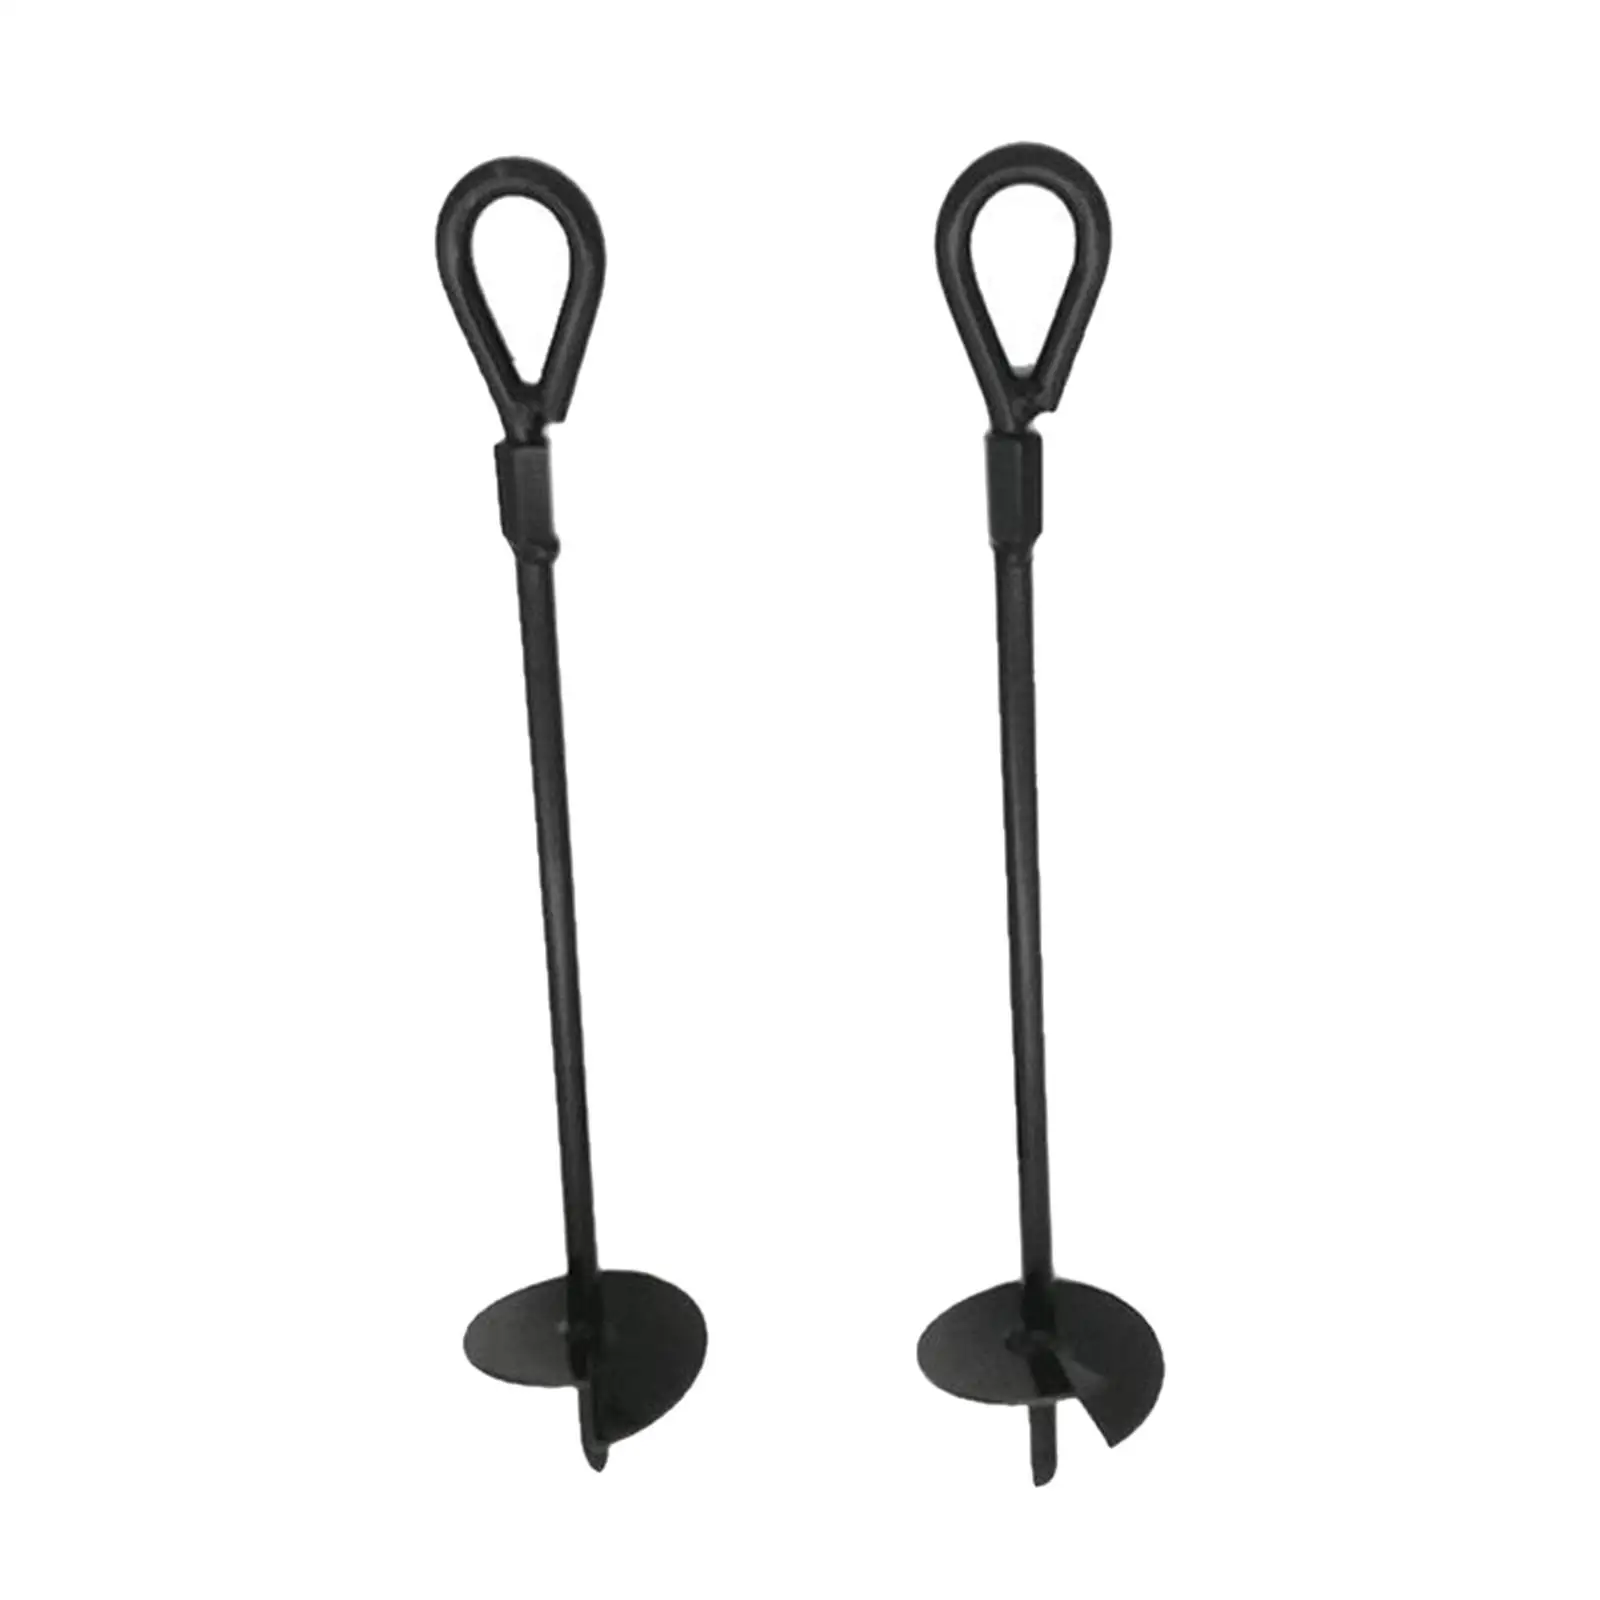 Outdoor Ground Anchor Protection Frame Stake Easy to Use for Canopies Picnic